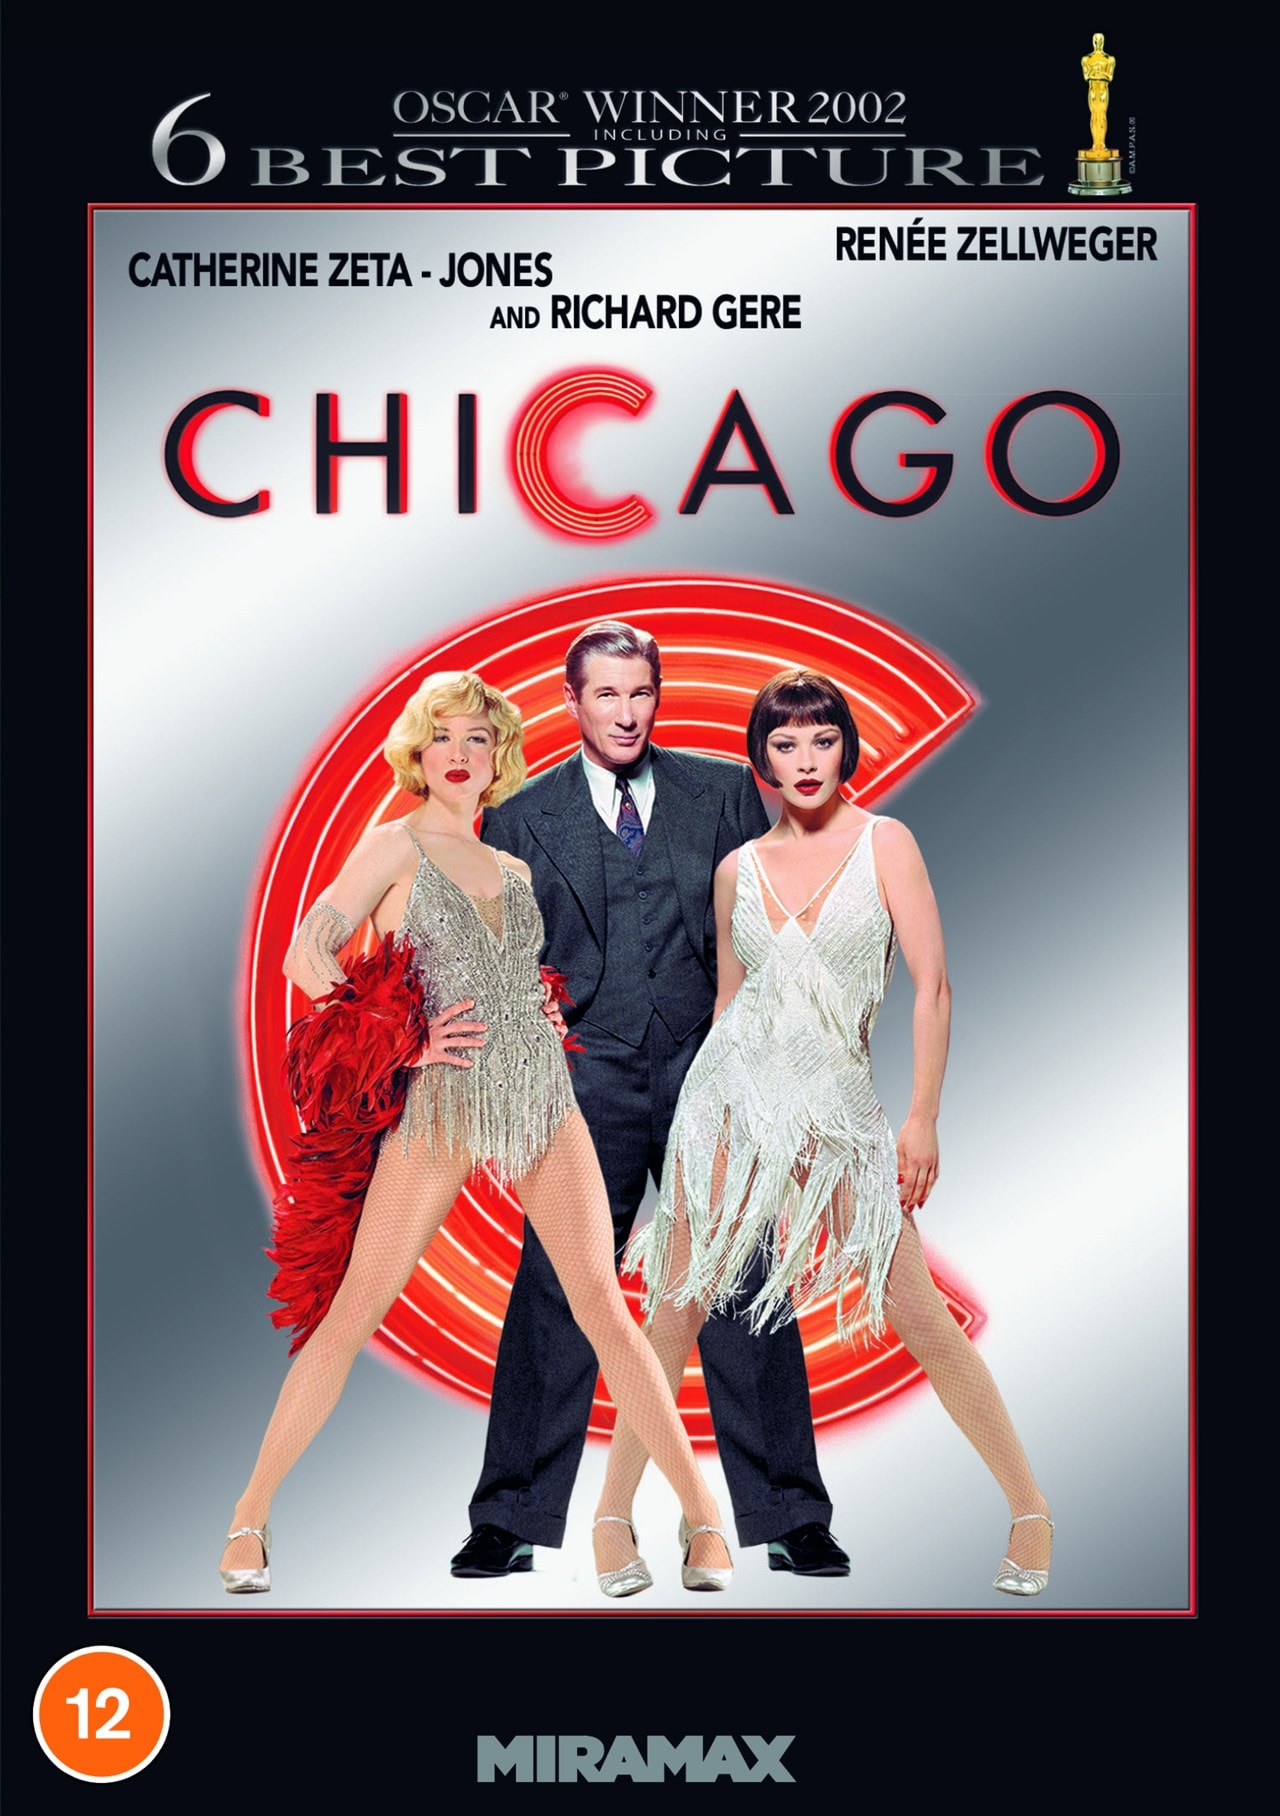 Chicago | DVD | Free shipping over £20 | HMV Store